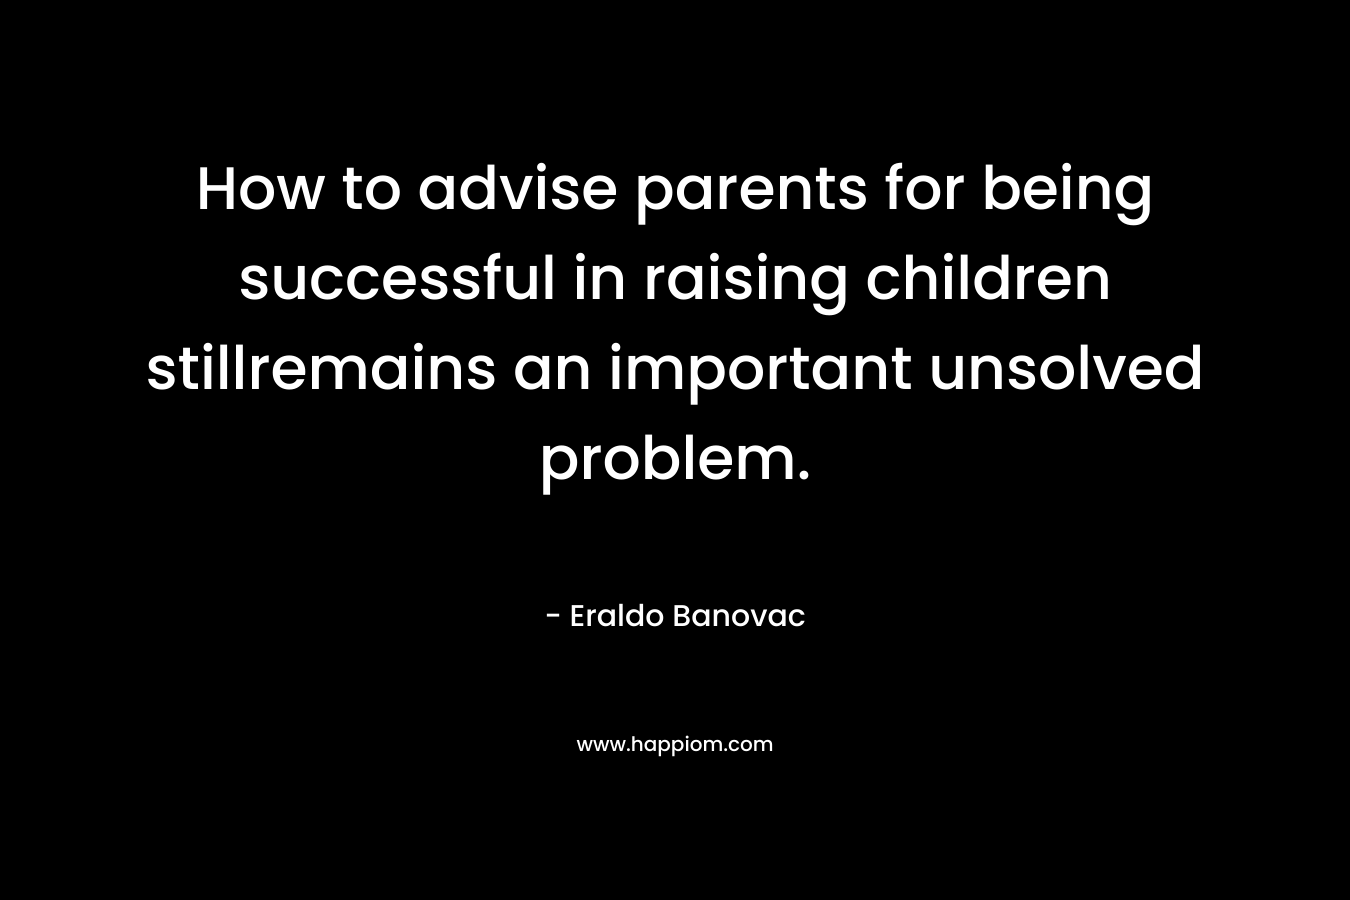 How to advise parents for being successful in raising children stillremains an important unsolved problem. – Eraldo Banovac